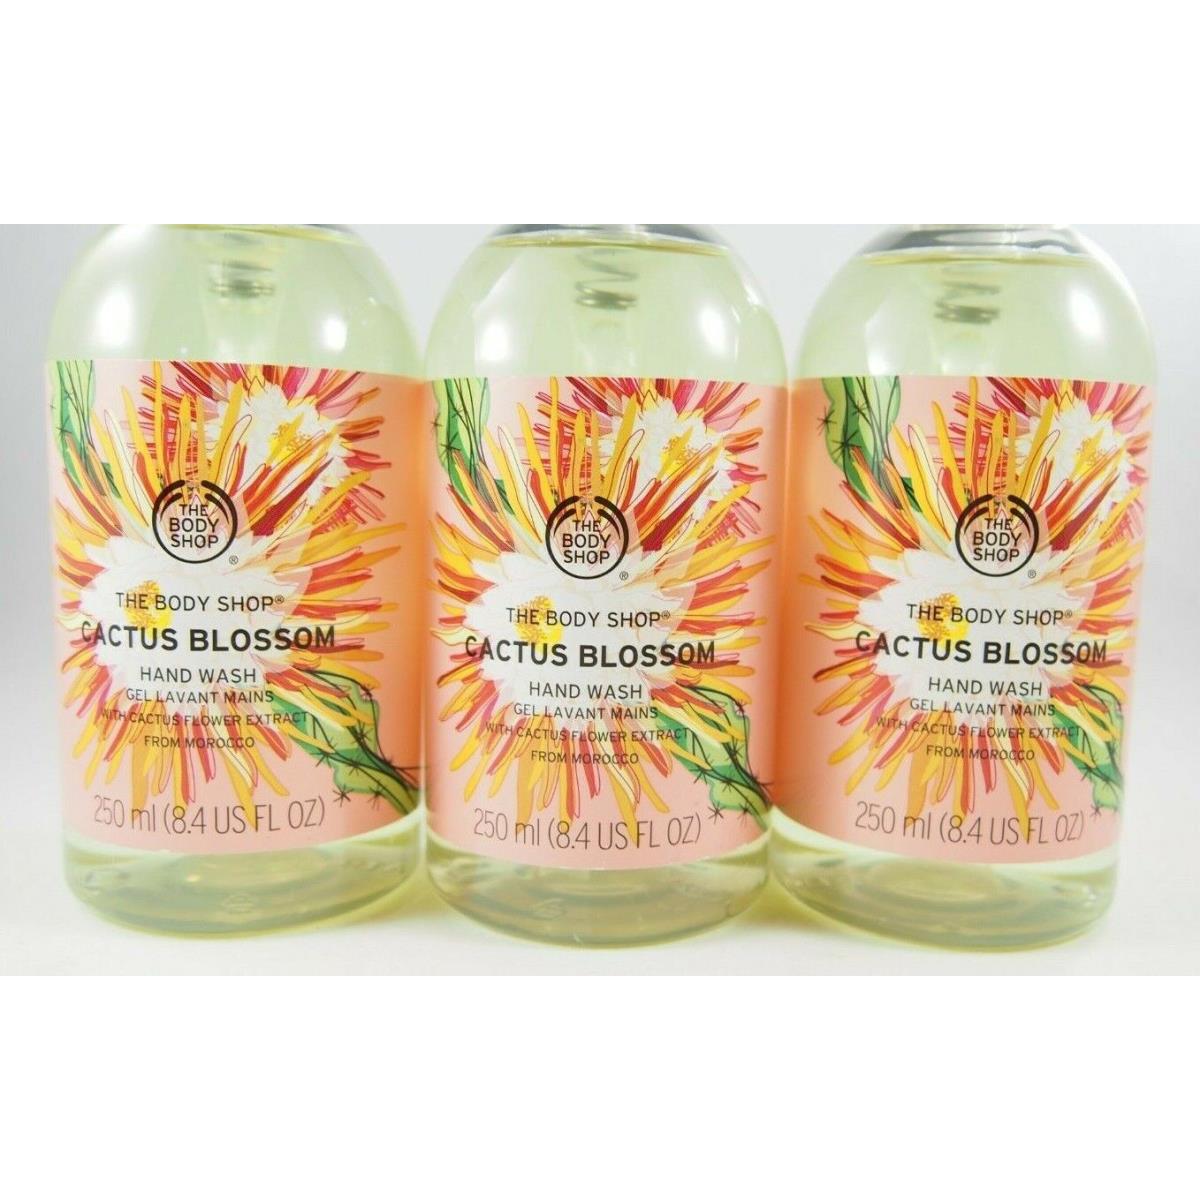 3 The Body Shop Limited Edition Cactus Blossom Hand Wash Soap 8.4oz